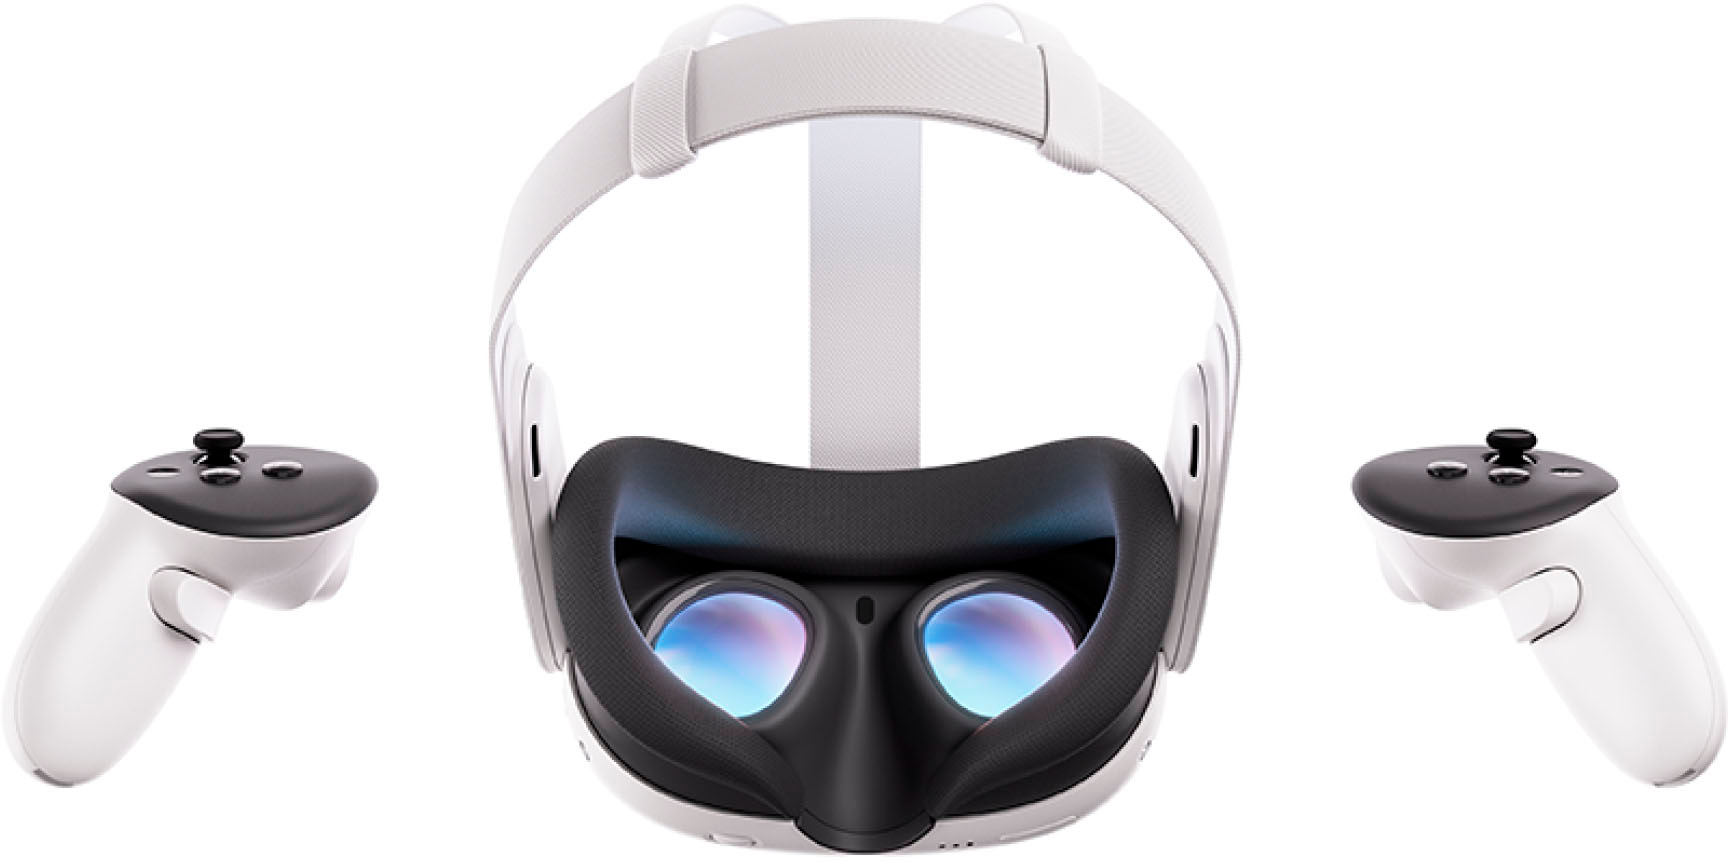 Meta Quest 3 Breakthrough Mixed Reality 512GB White 899-00583-01 - Best Buy